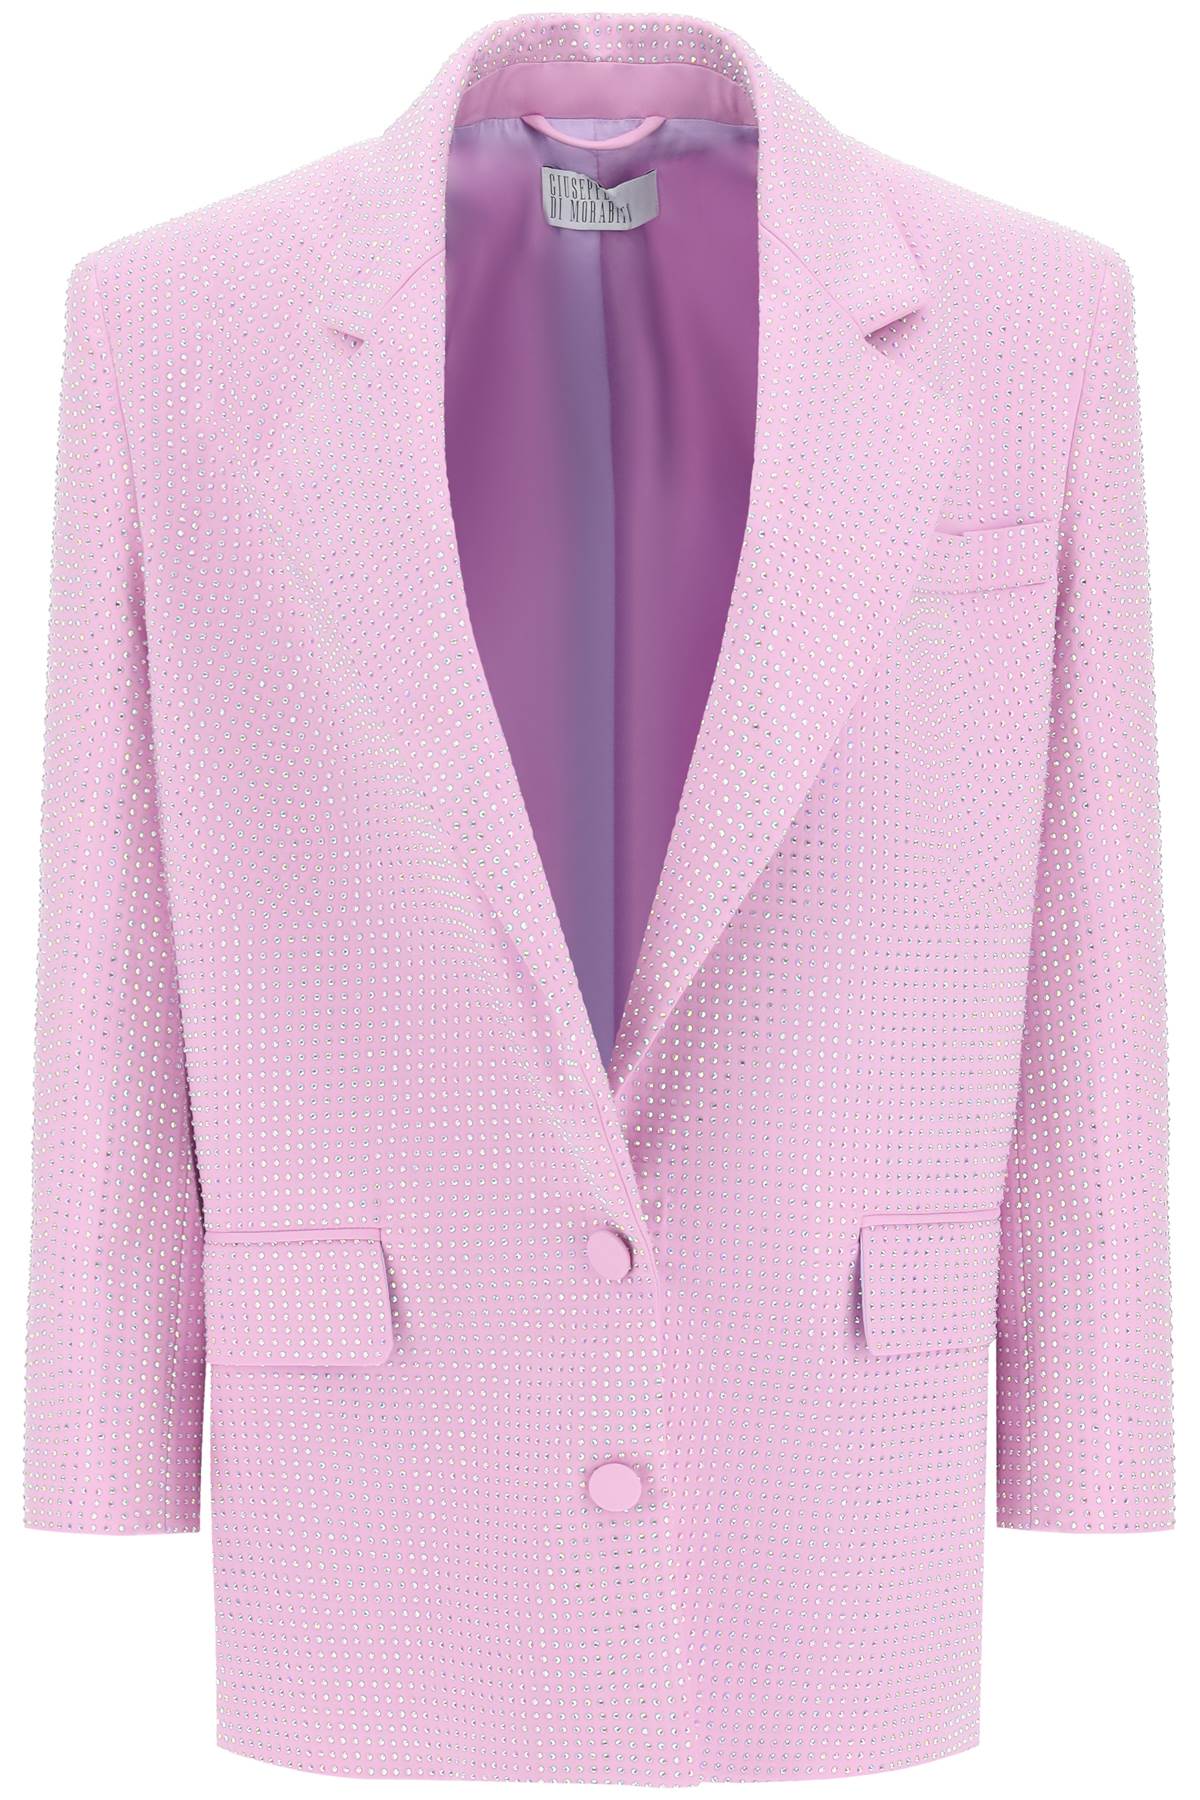 Giuseppe di morabito stretch cotton jacket with crystals-0